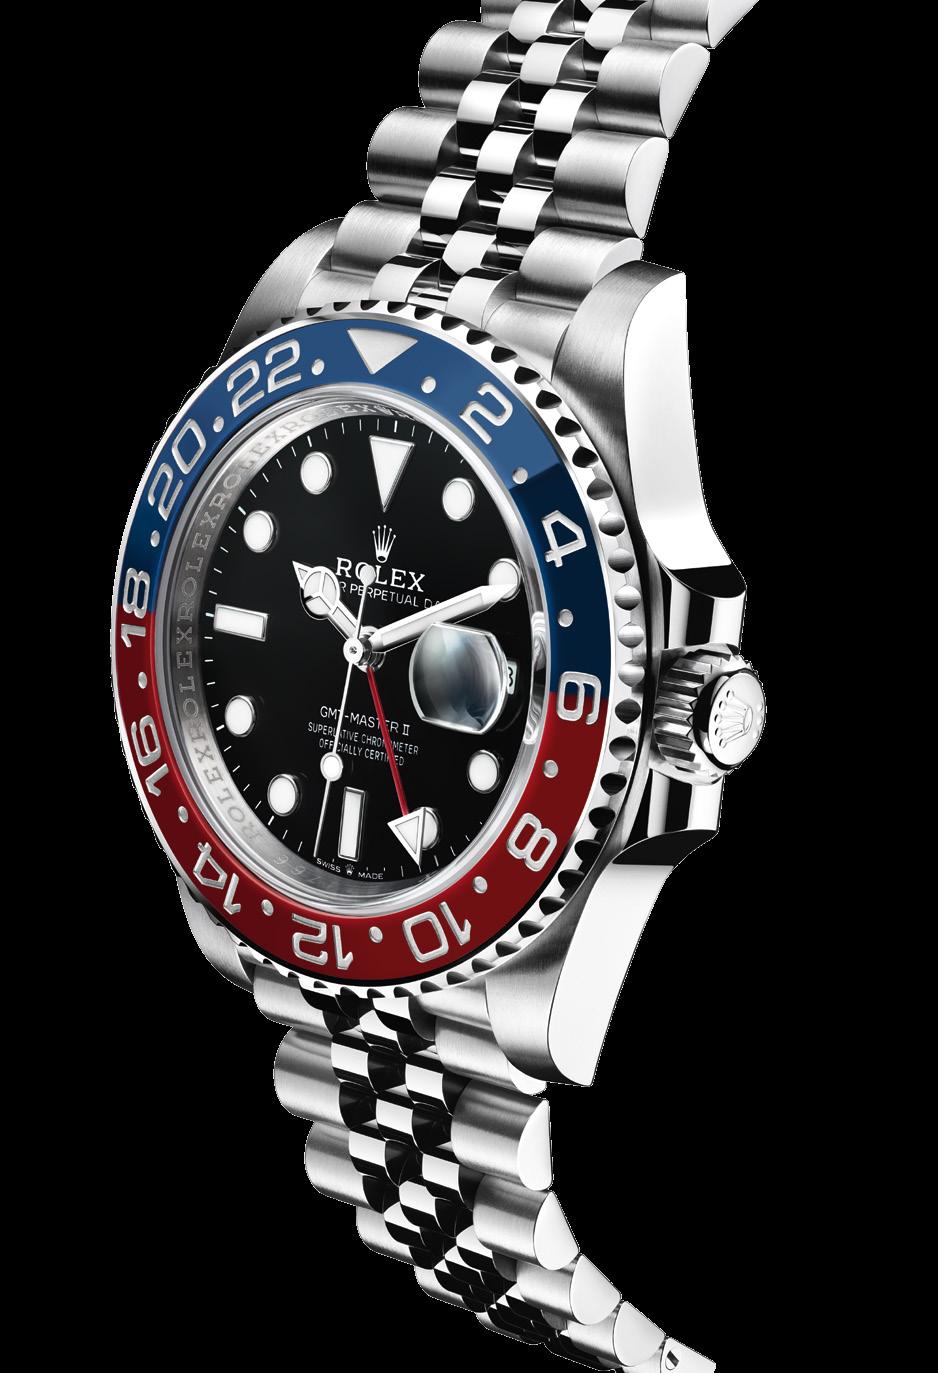 Over the years its emblematic bezel has been presented in various colours, in both single and two-coloured combinations.